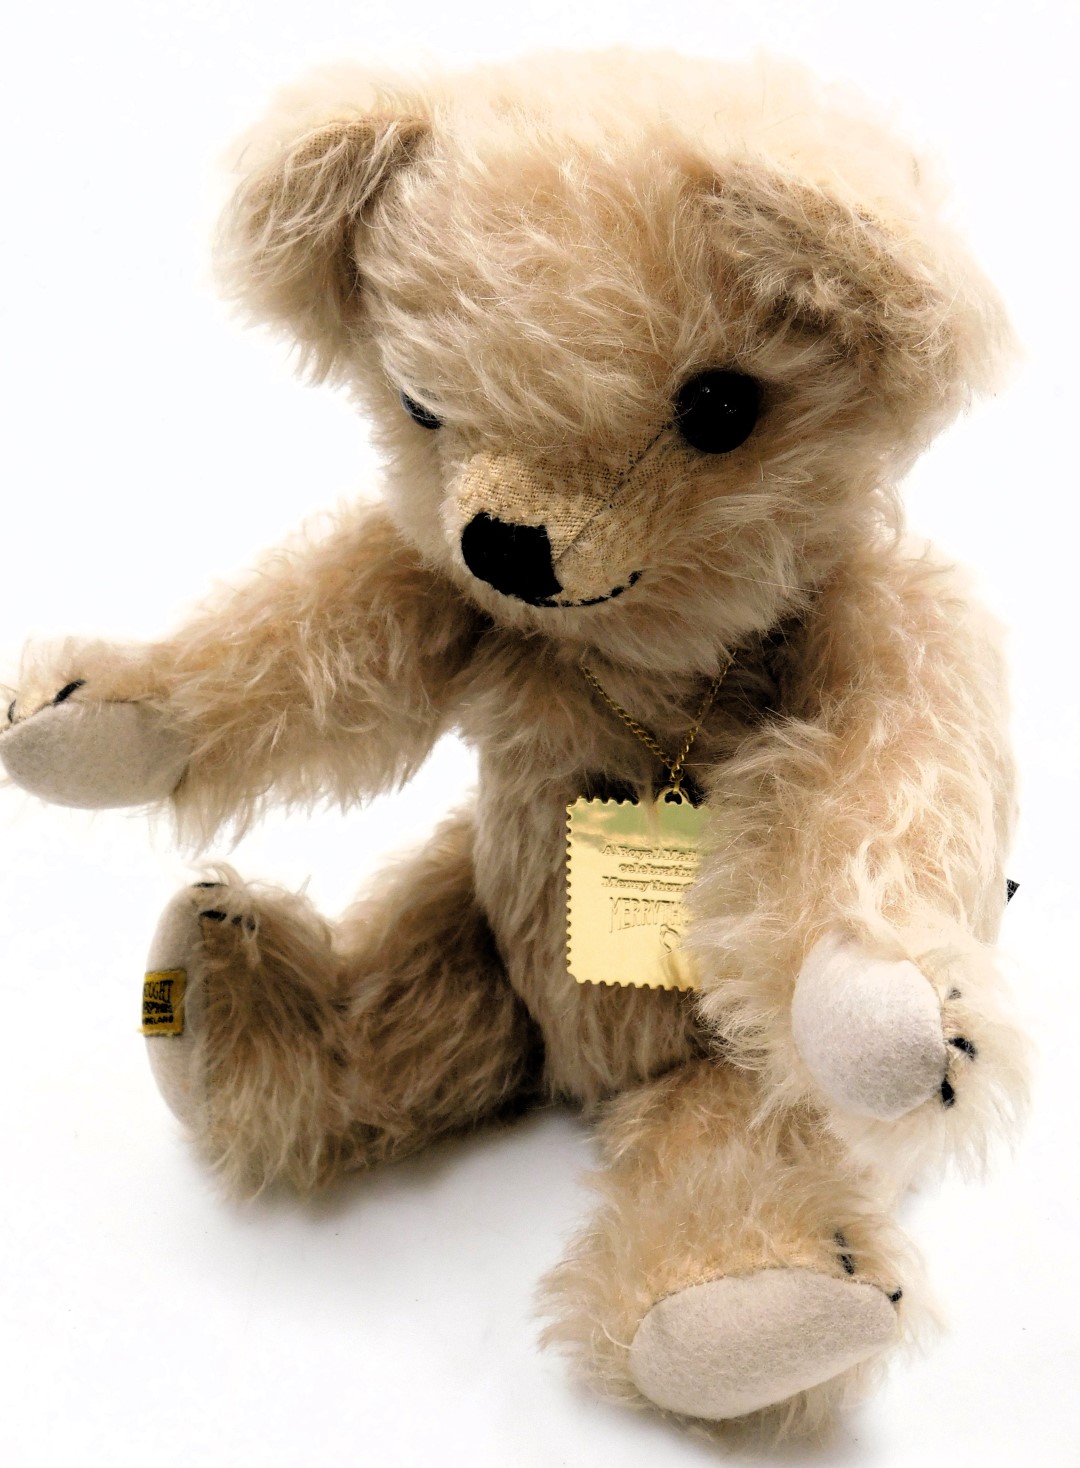 A Merrythought teddy bear, for the London 2012 Olympic Games, together with a copy of the first Merr - Image 3 of 5